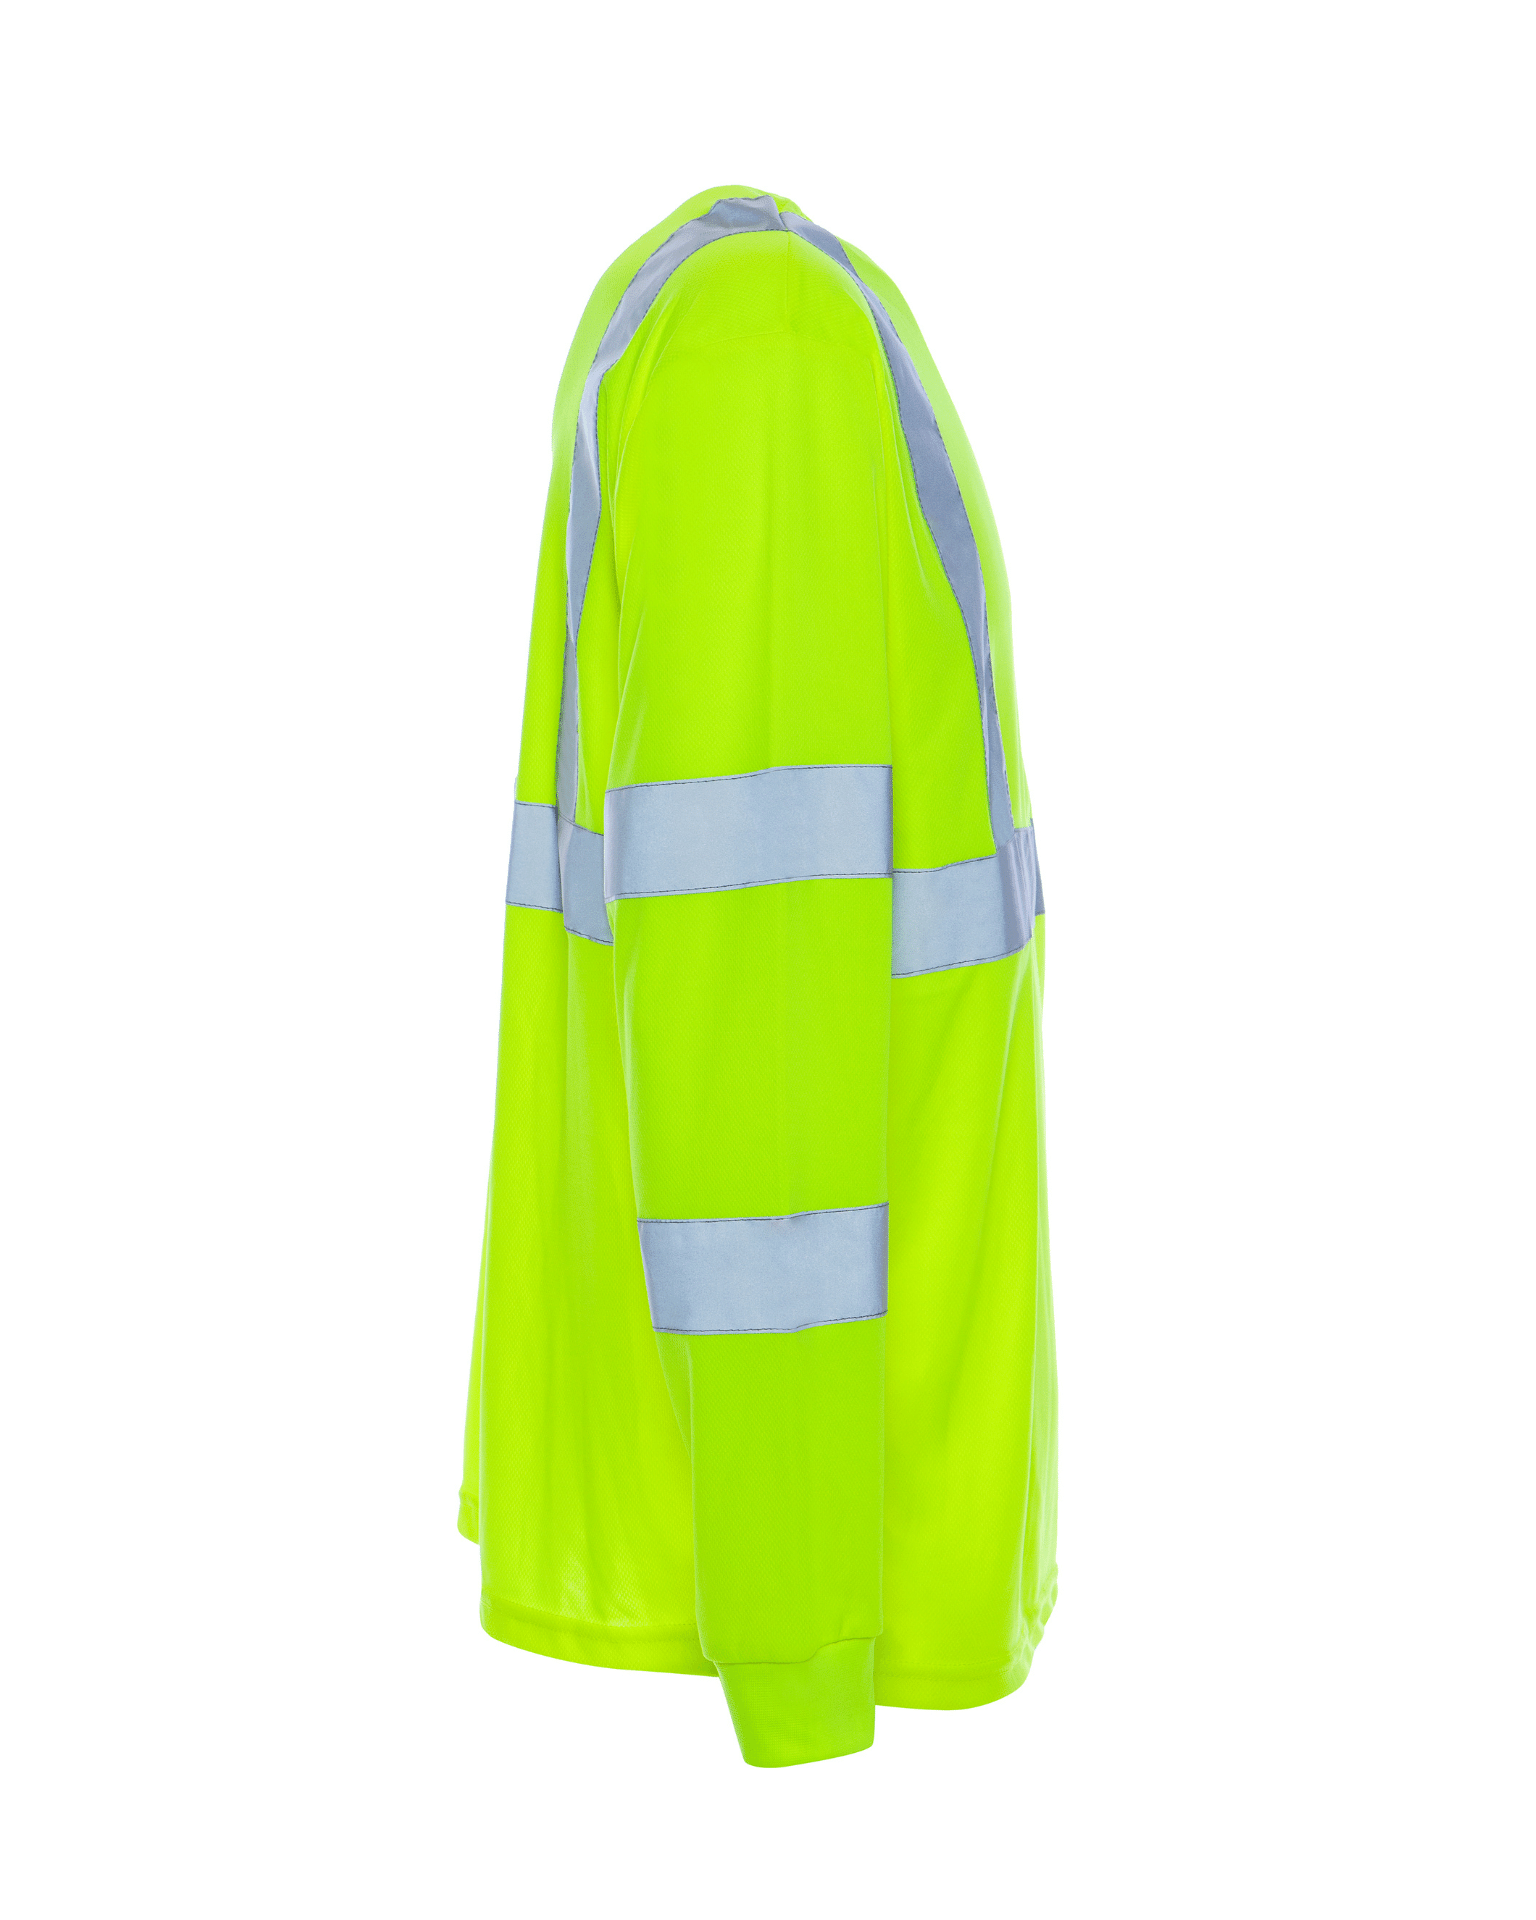 ANSI Class 3 High Visibility breathable fabric liquid and stain repellent long sleeve t-shirt by Utility Pro